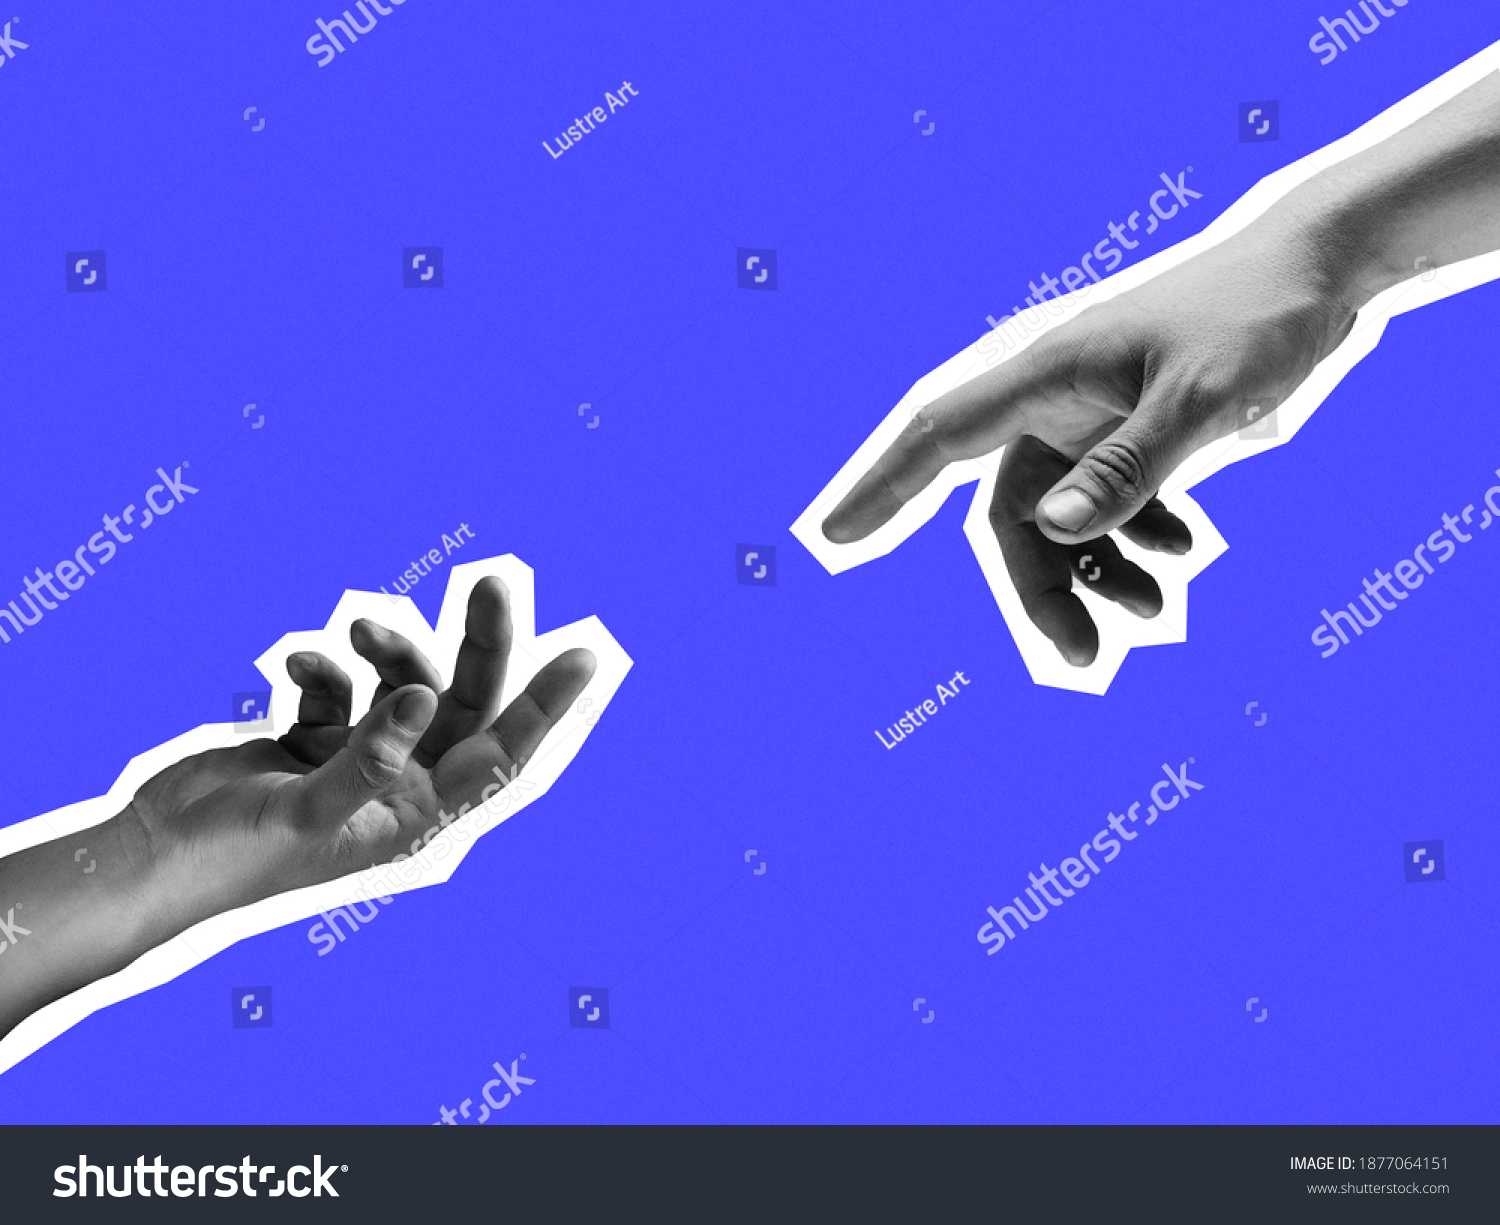 Two hands reaching out towards each other isolated on purple background. #1877064151